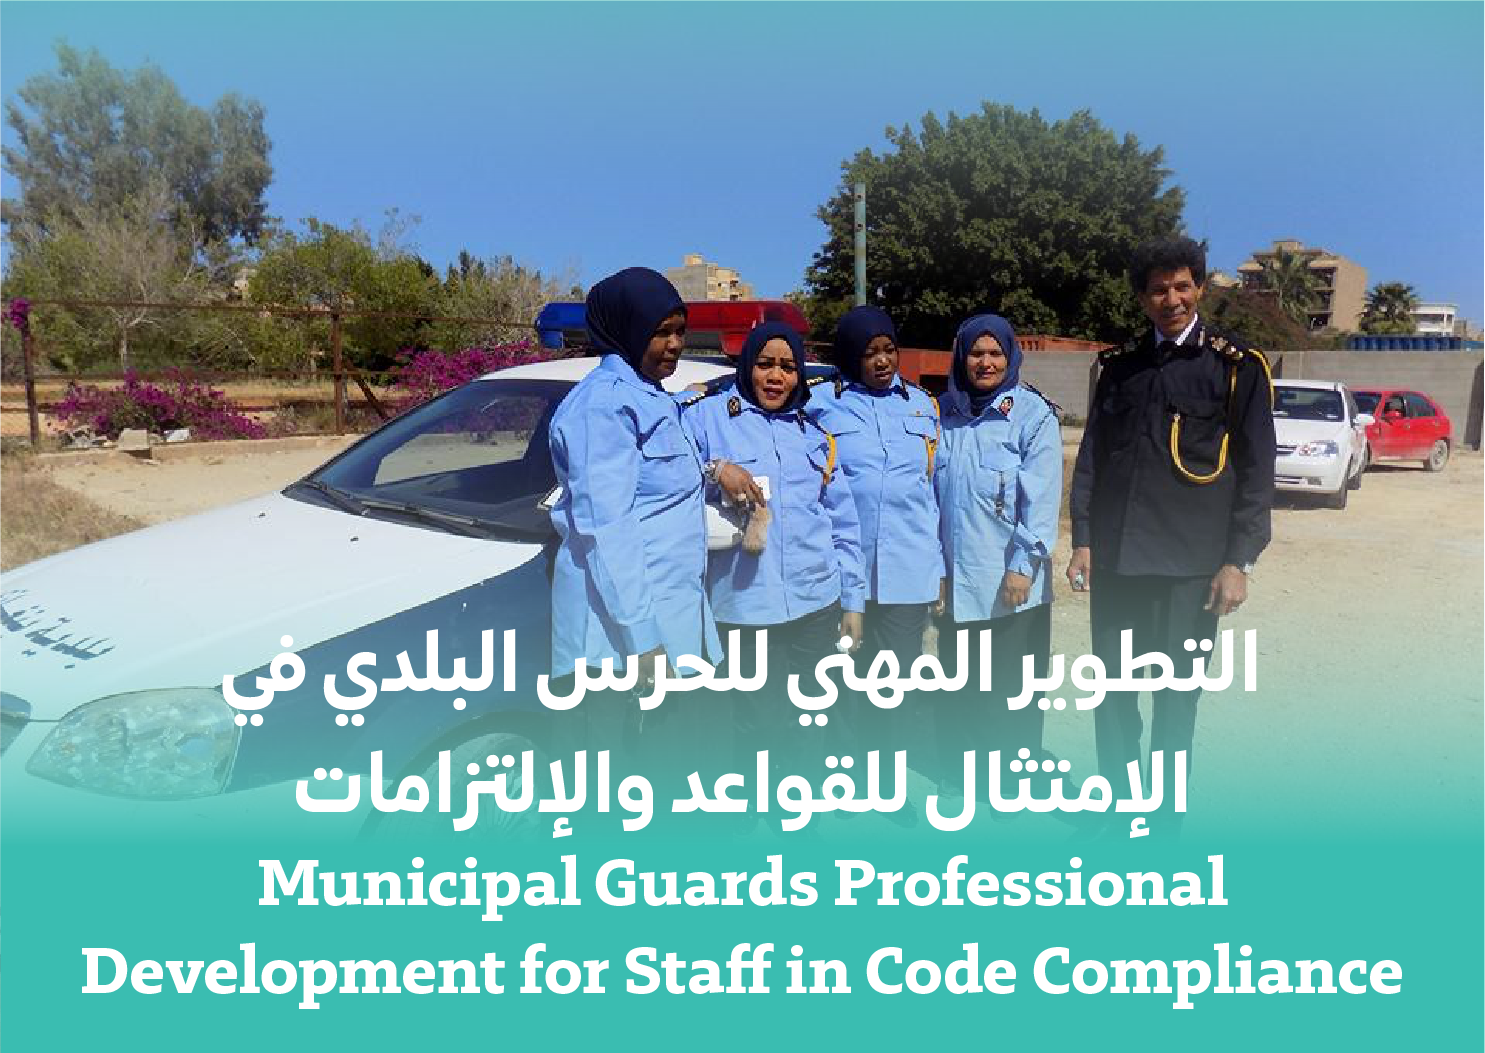 Municipal Guards Professional Development for Staff in Code Compliance